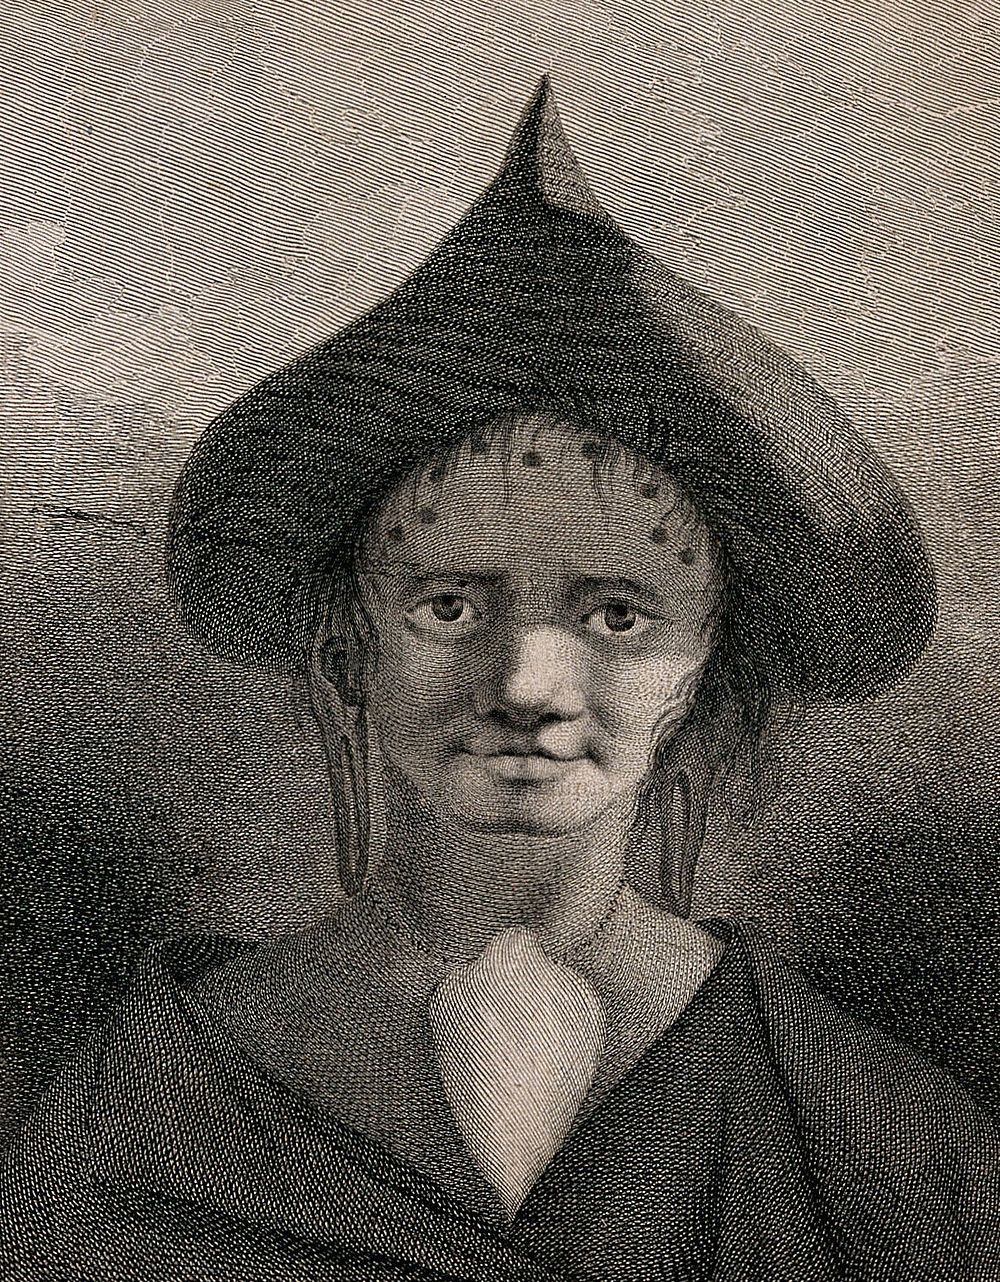 A woman inhabitant of Easter Island (Rapa Nui). Engraving by J. Caldwall, 1777 after W. Hodges, 1775.